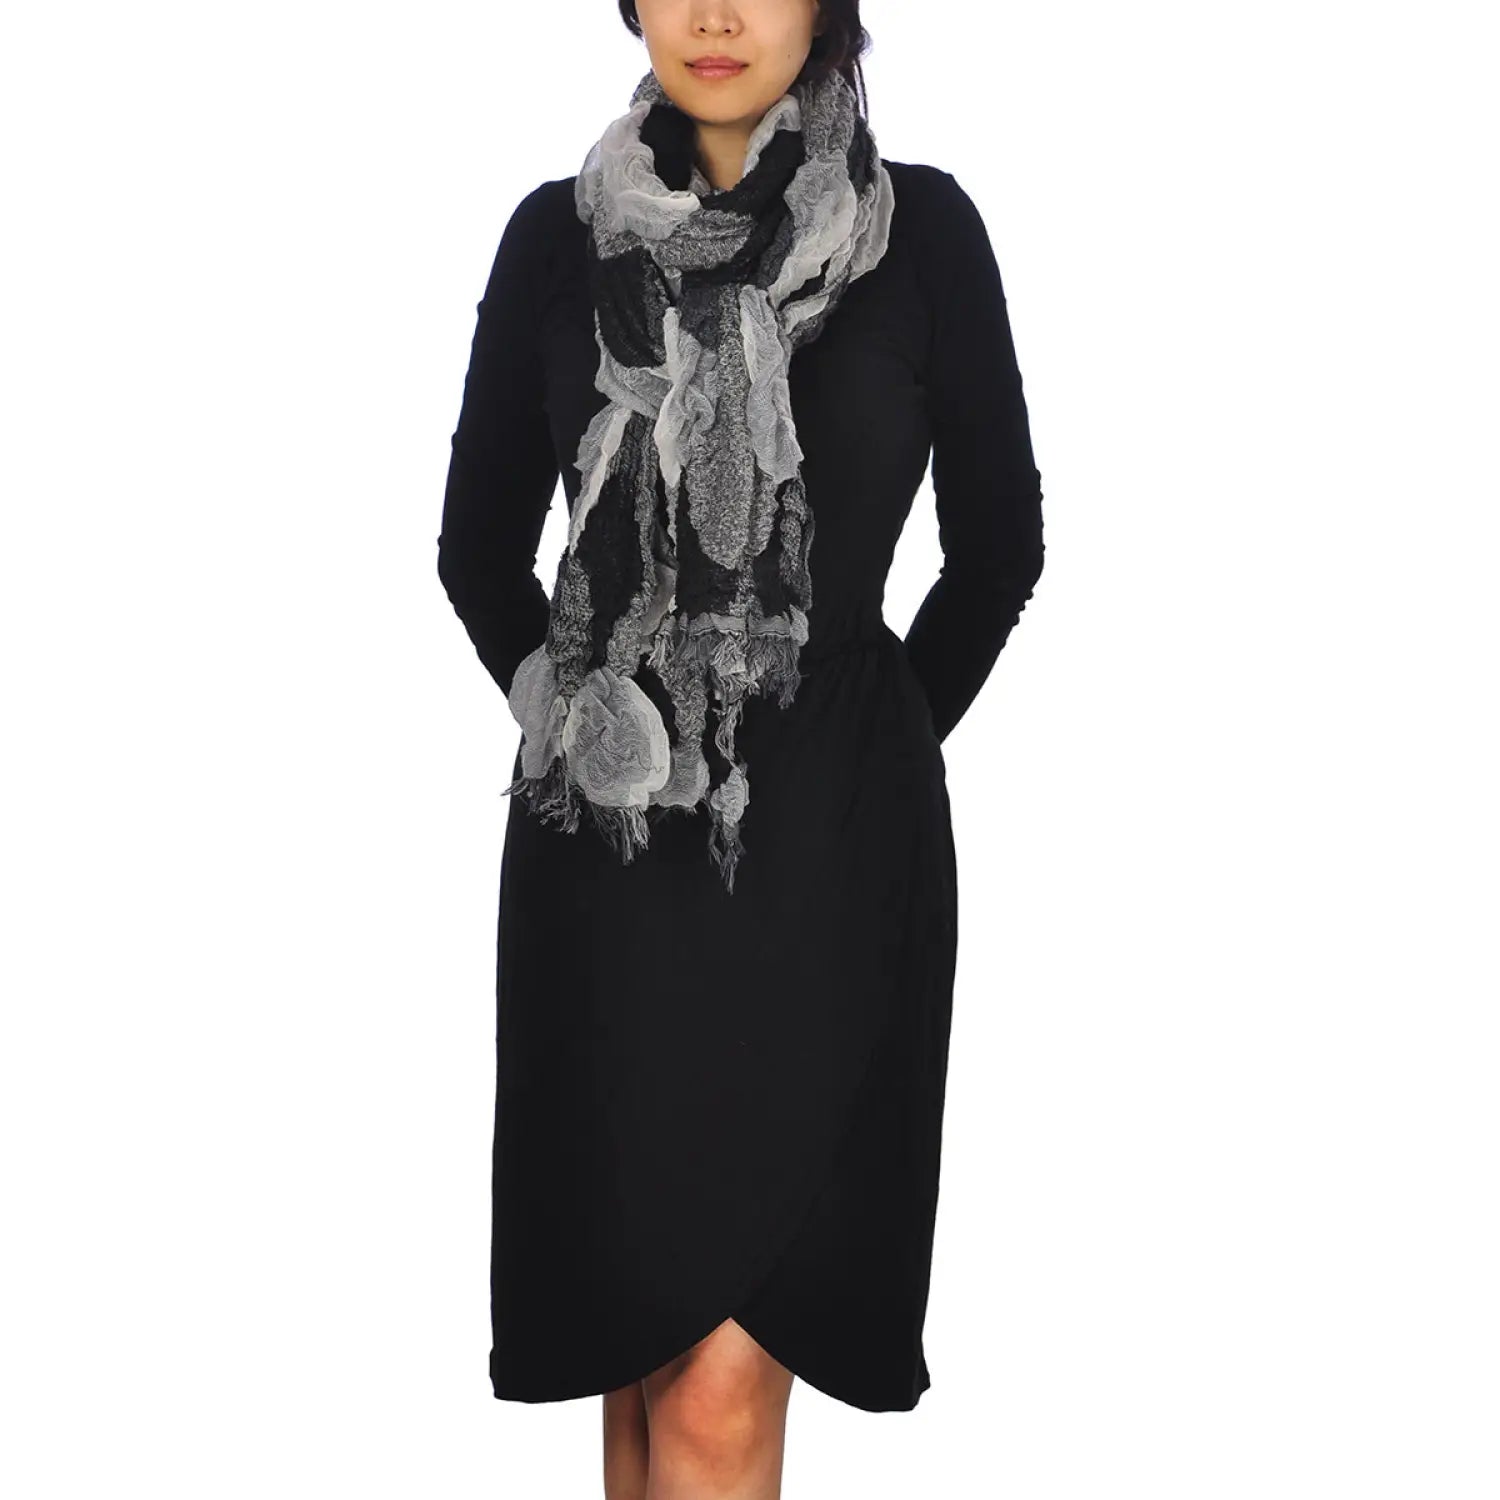 Woman wearing black dress and two-toned textured reversible scarf from ’Multicoloured Two-Toned Textured Reversible Autumn Winter Scarf’.